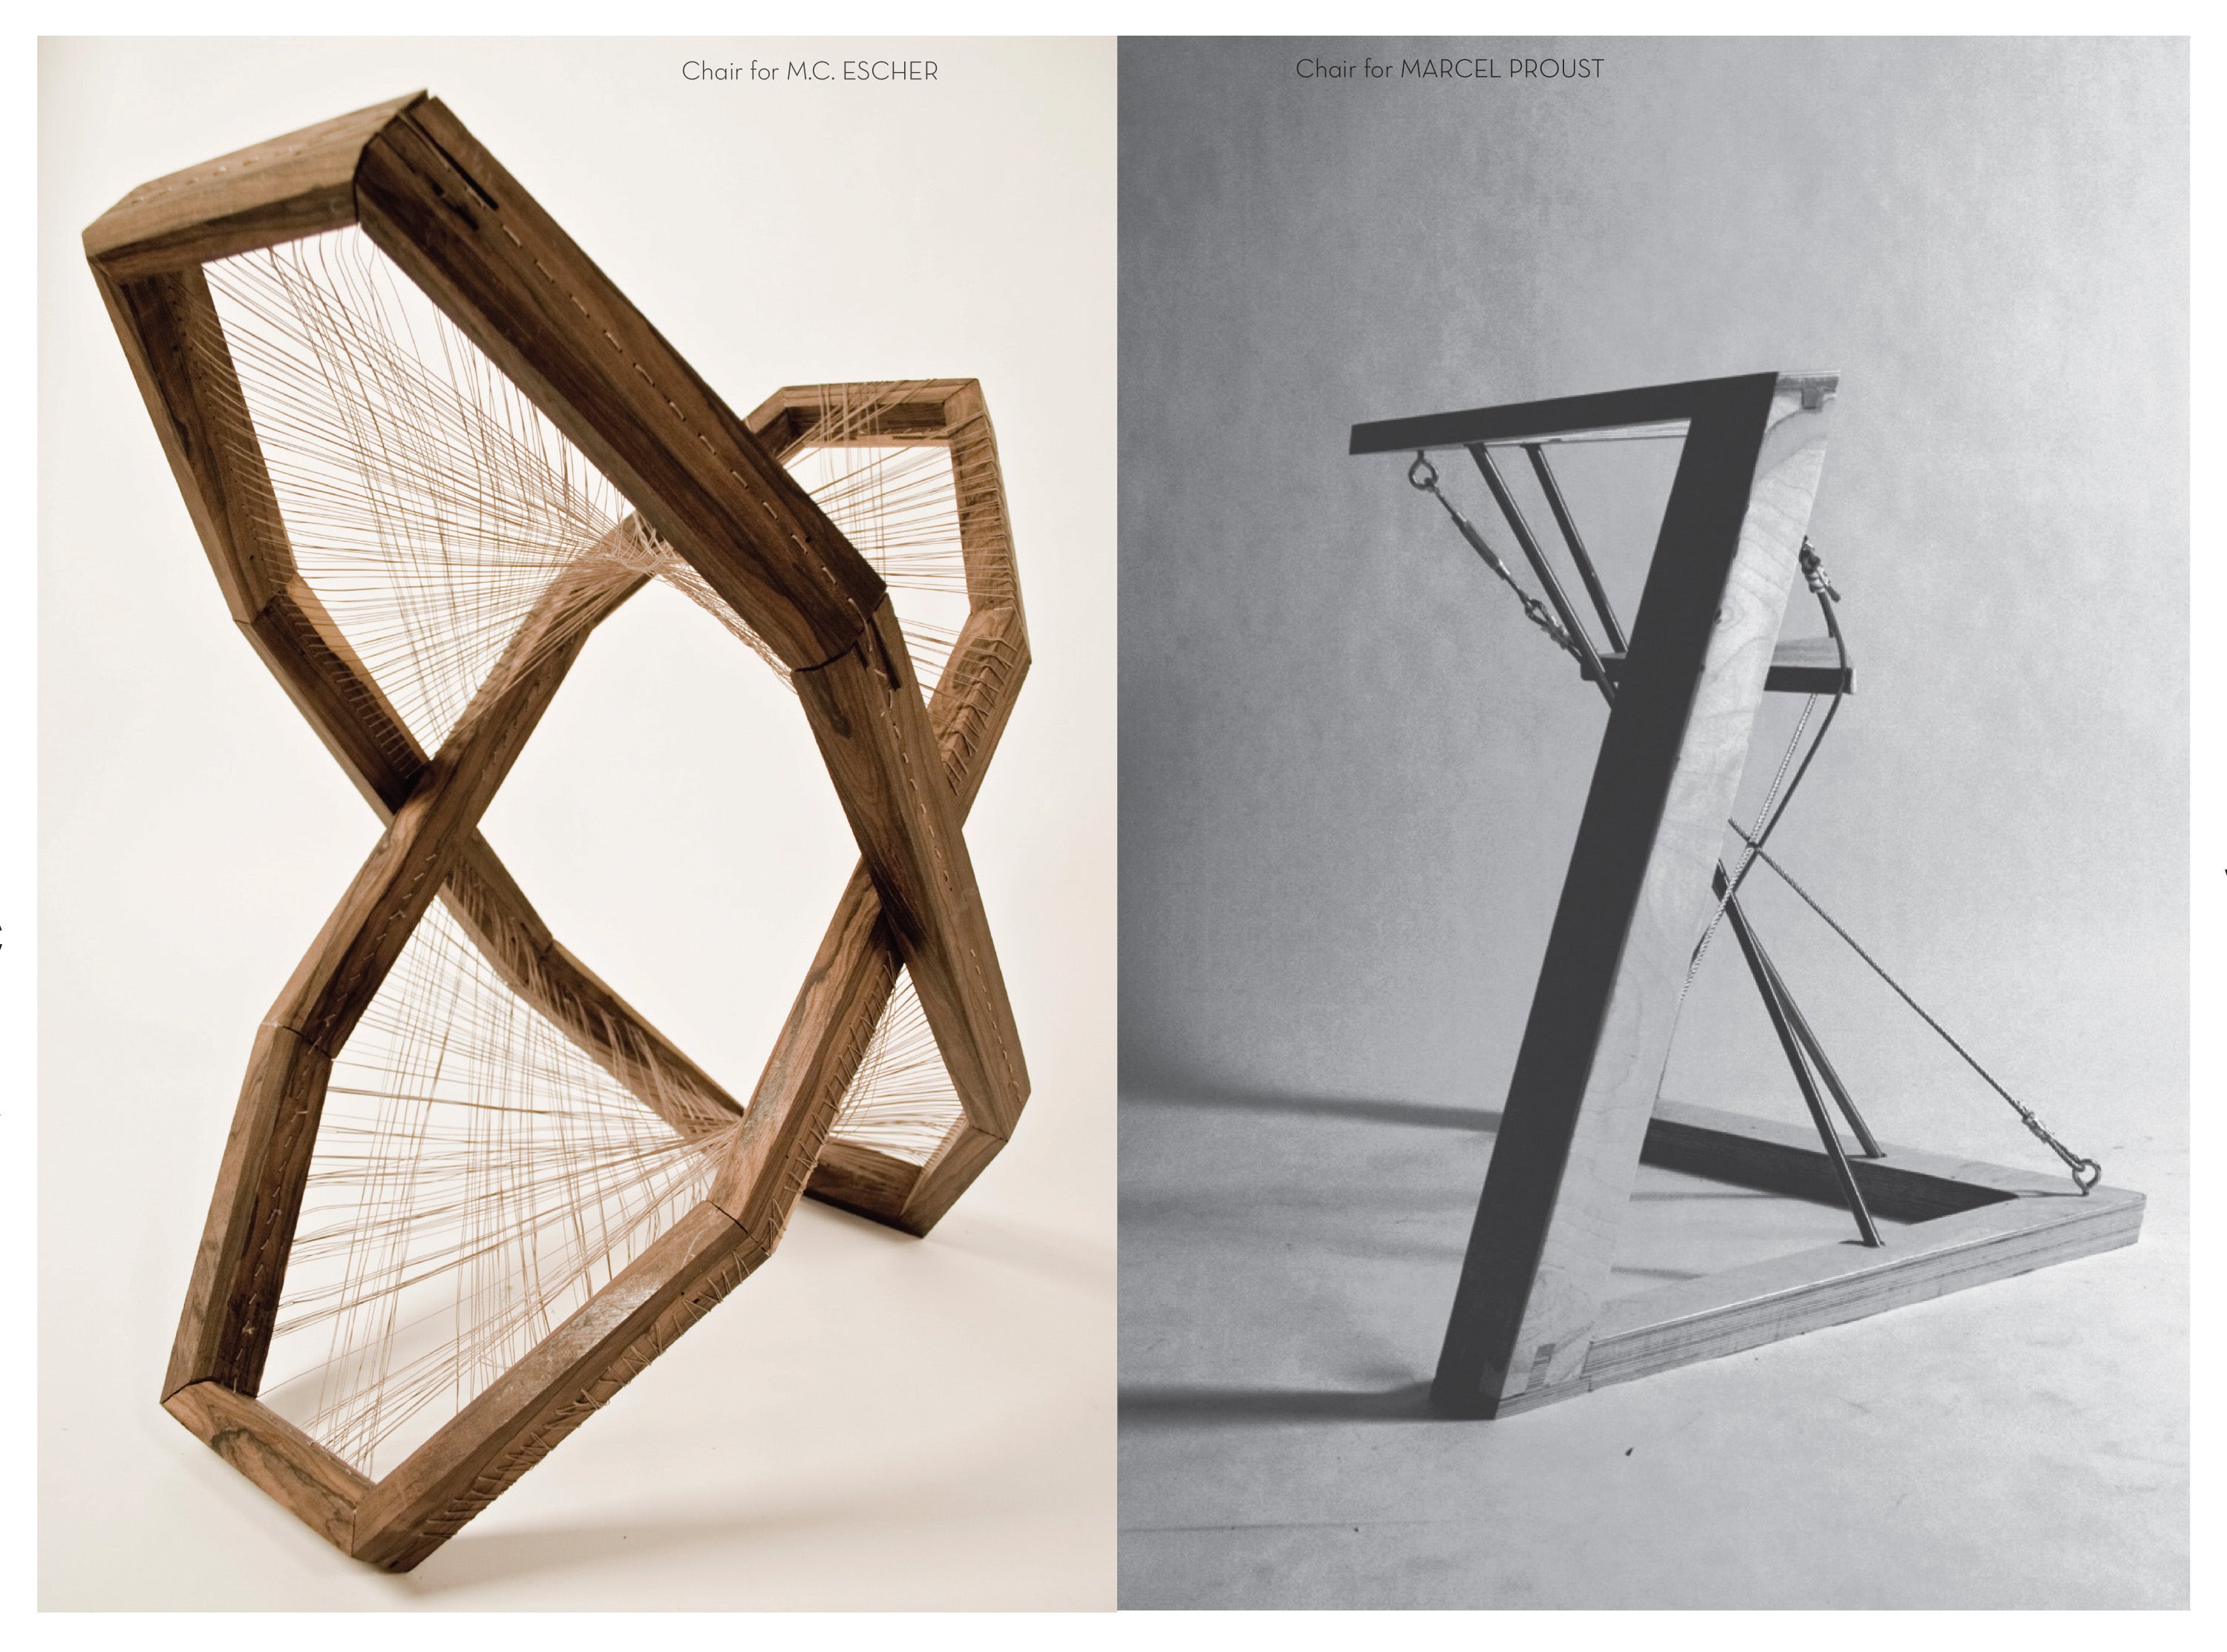 Two photographs of two different chairs. One is a chair held together from wires in tension, the other is very similar in design